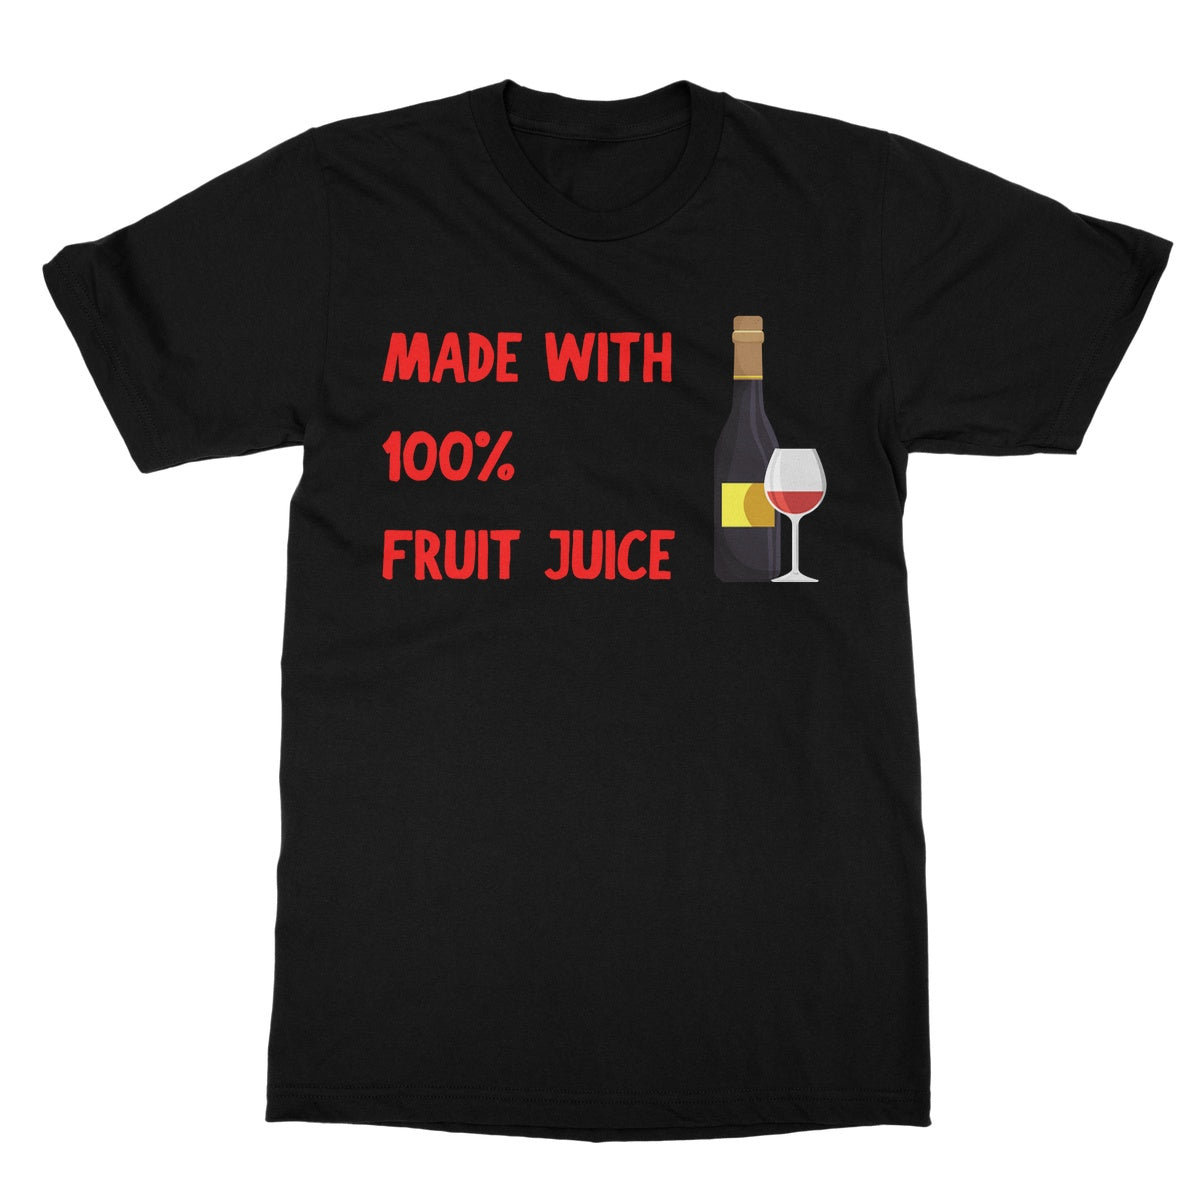 made with 100% fruit juice t shirt black